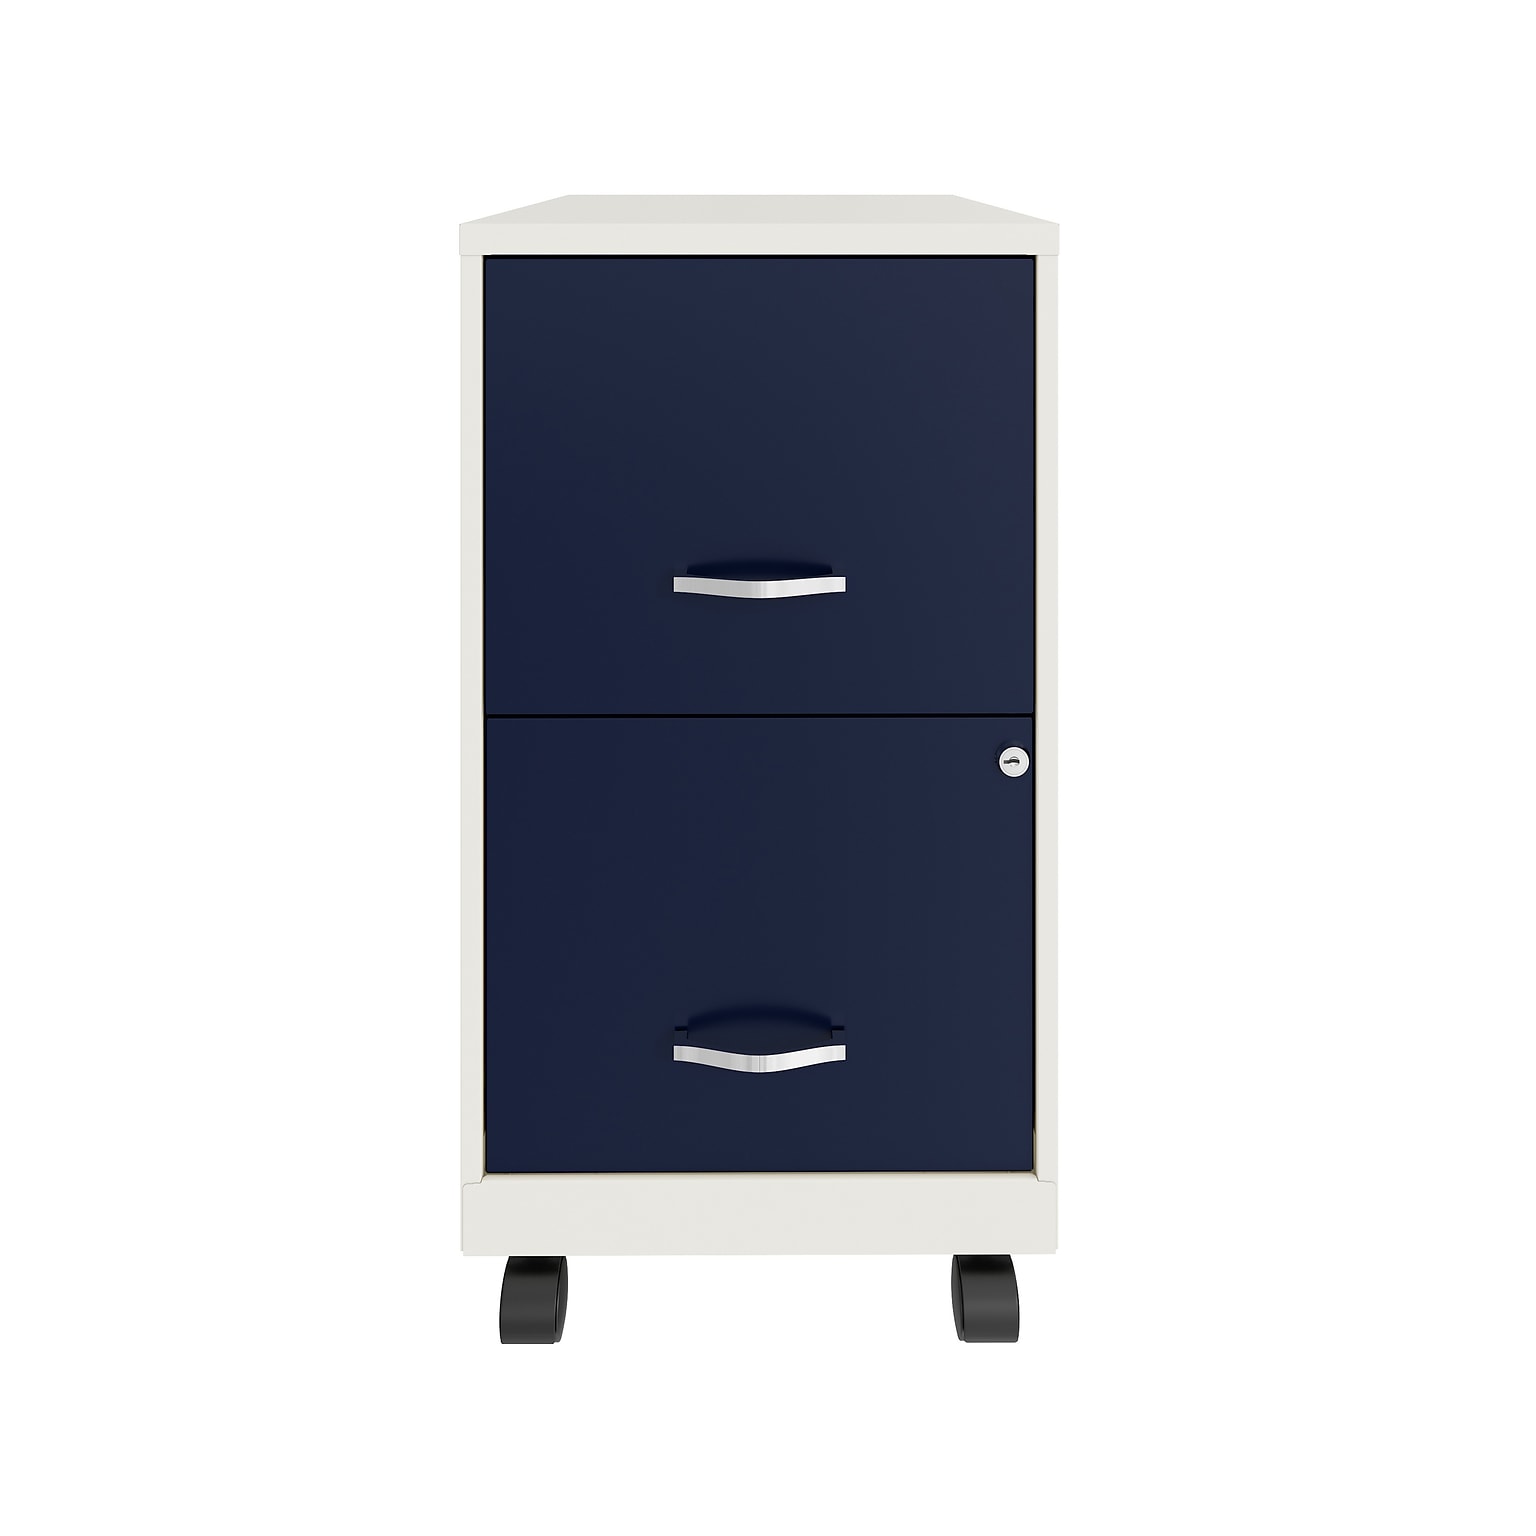 Space Solutions SOHO Smart File 2-Drawer Mobile Vertical File Cabinet, Letter Size, Lockable, Pearl White/Navy (25335)